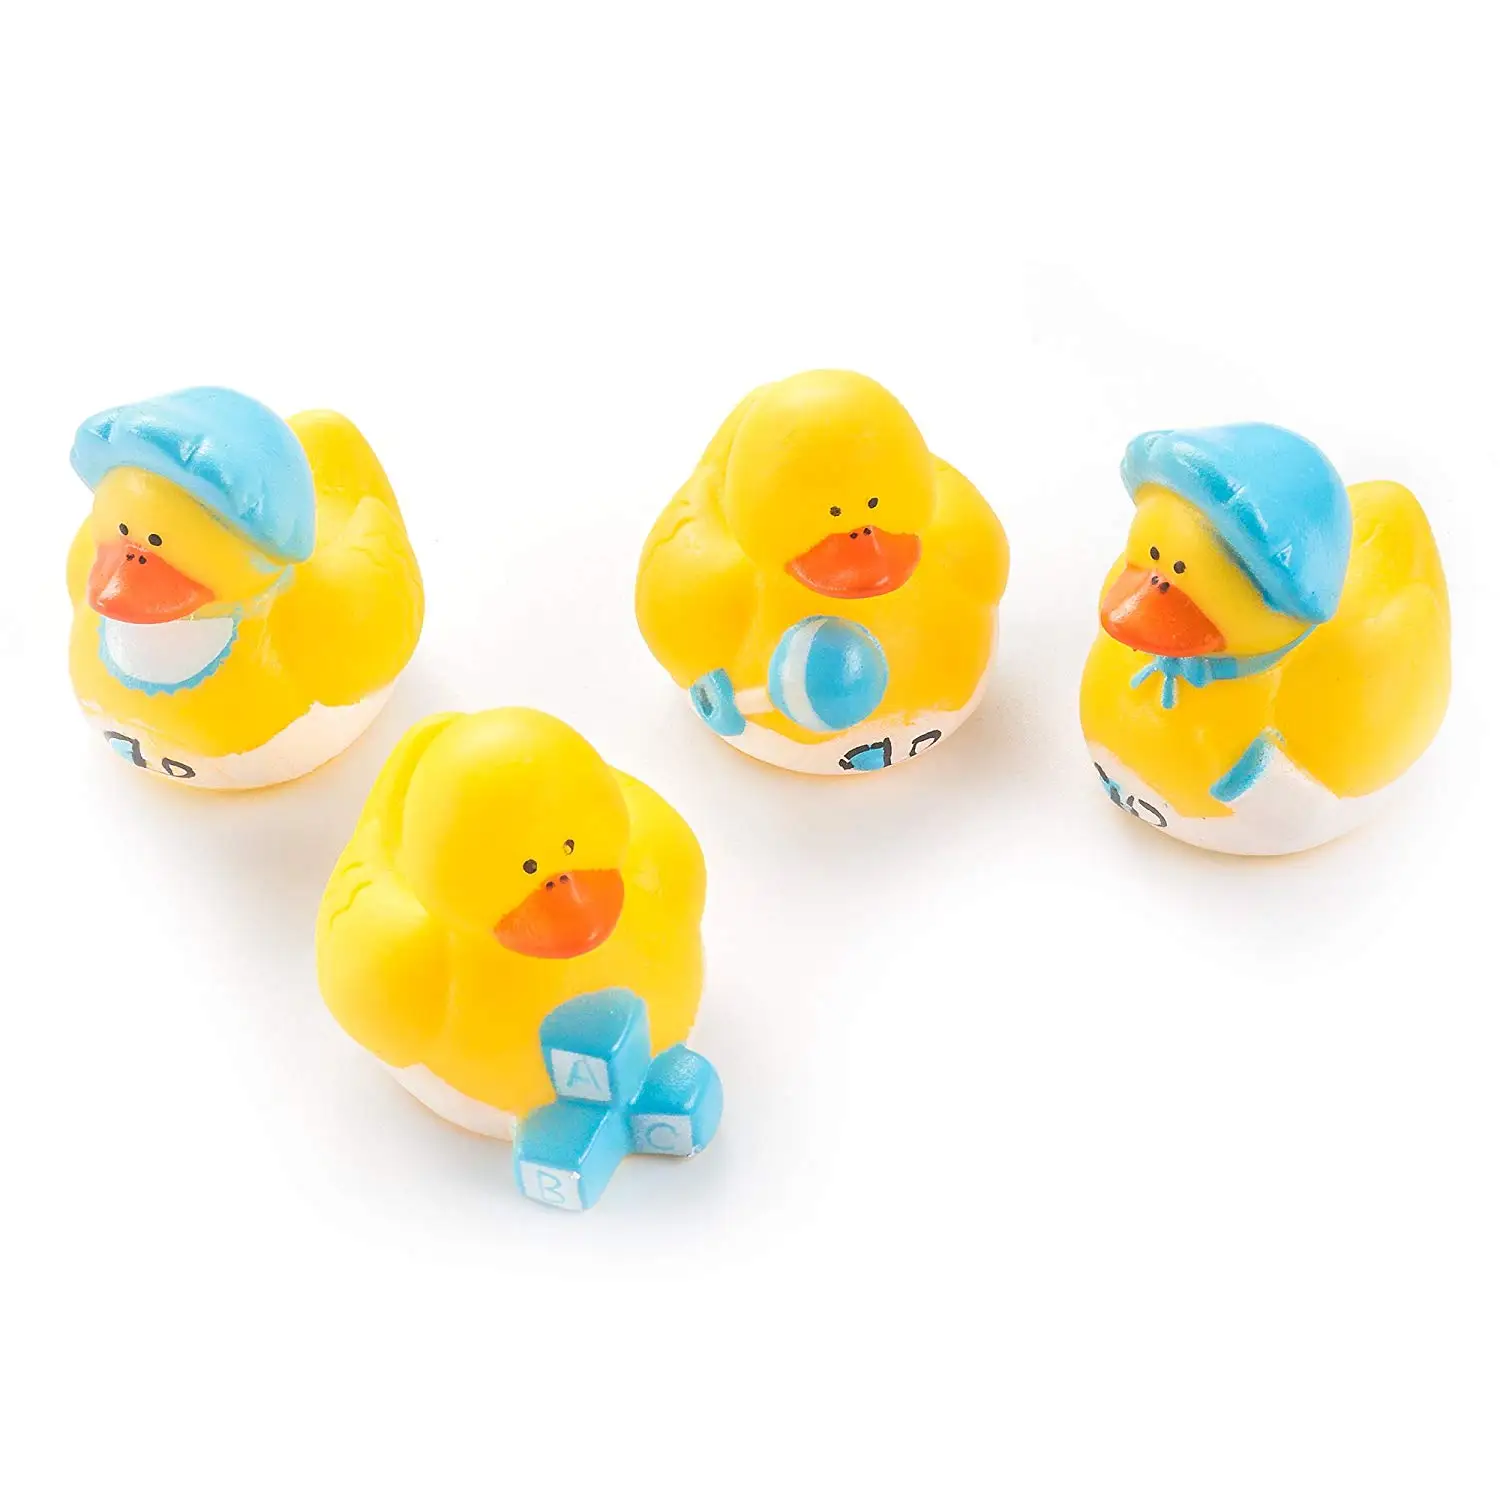 28 Top Pictures Yellow Duck Baby Shower Decorations / 20pcs Random Baby Bath Duck Toy Rubber Yellow Duck Shower Water Bathing Toys For Baby Kids Children Birthday Gift Beach Party Bath Toy Aliexpress